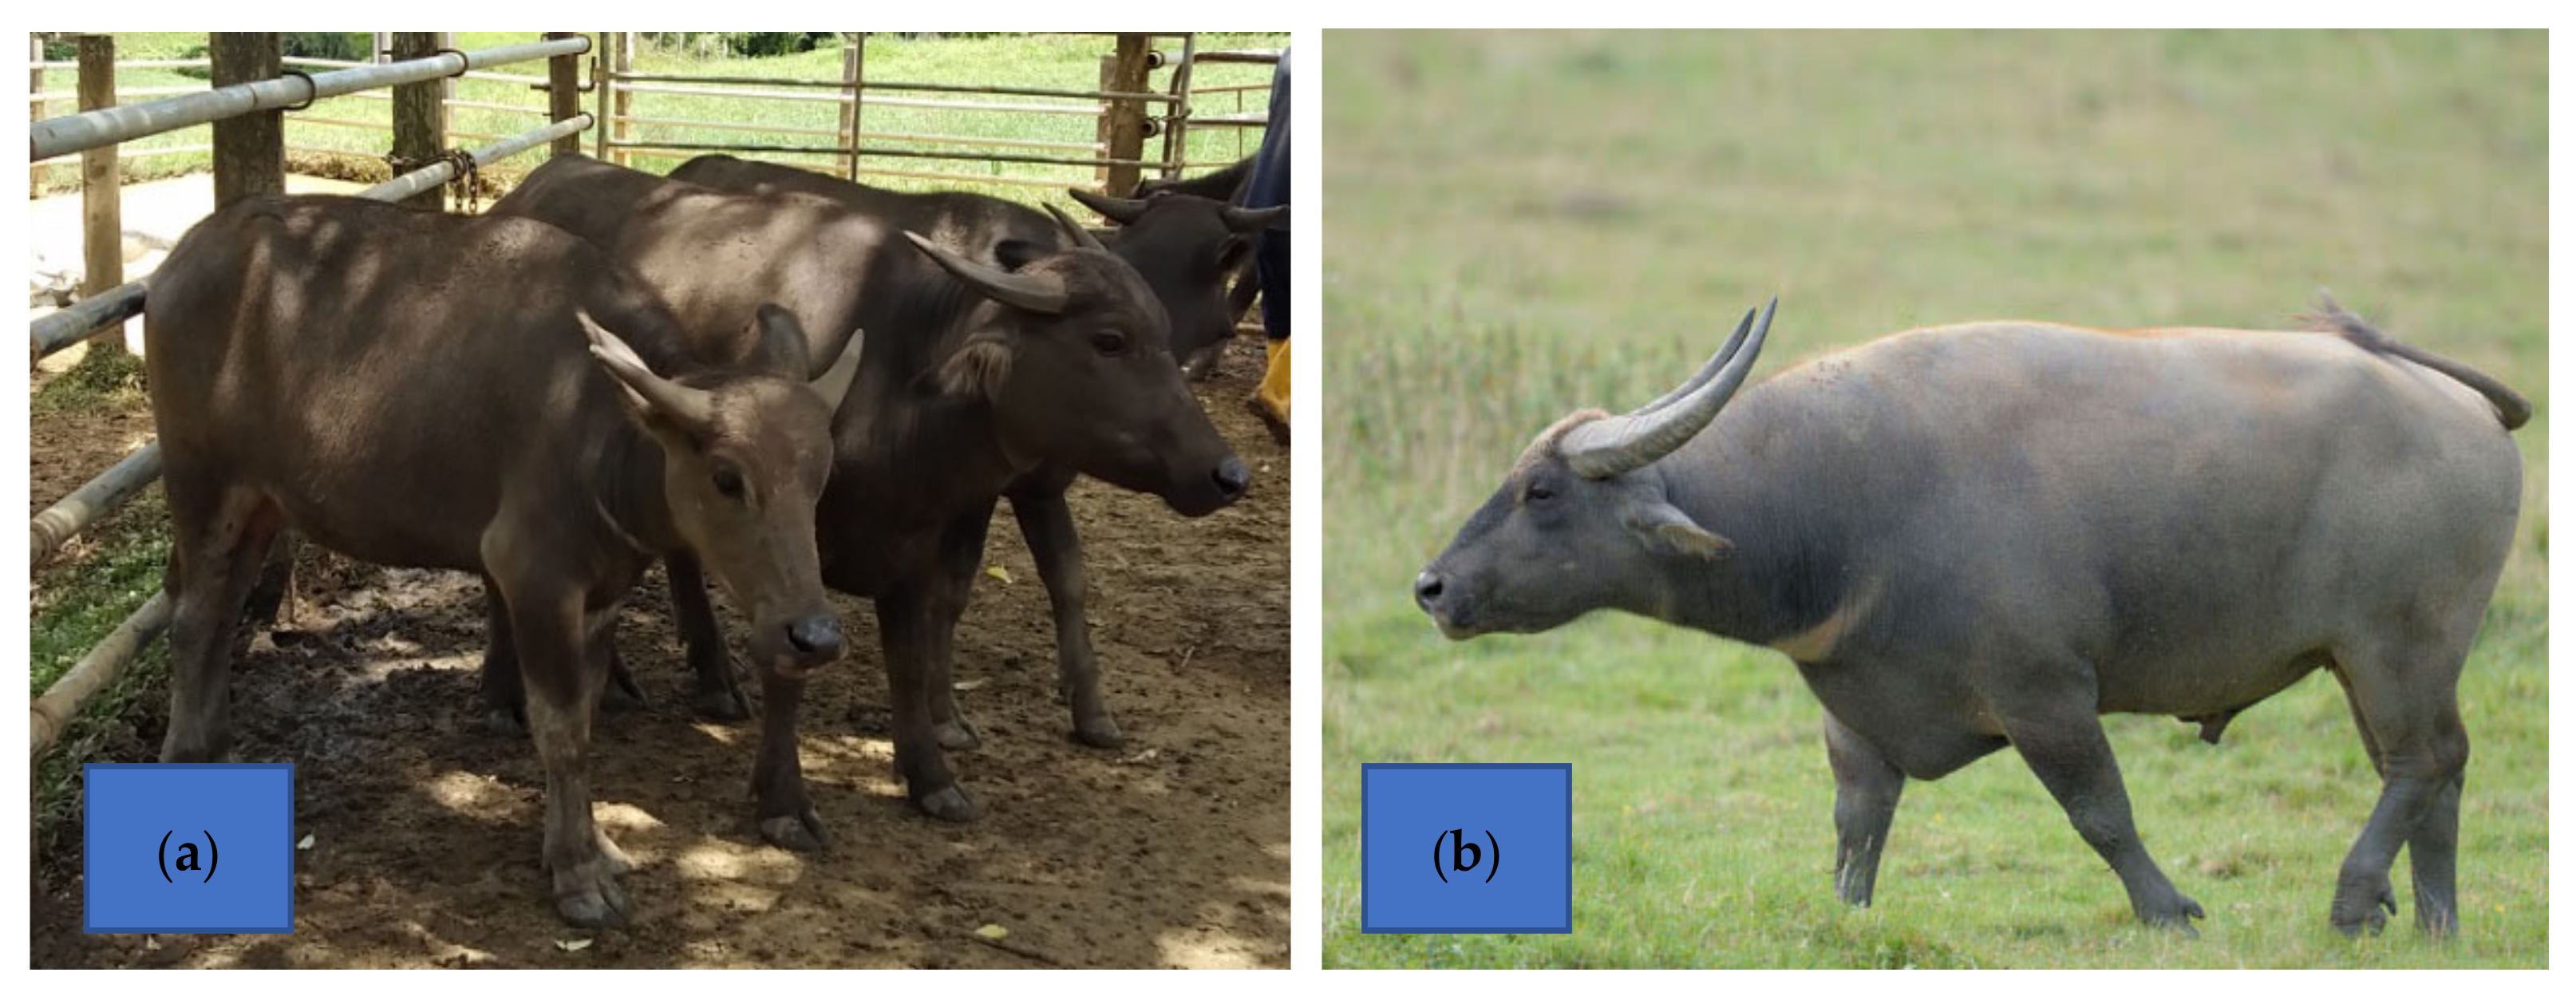 Animals | Free Full-Text | The of Feed Supplementations on Asian Buffaloes: A Review | HTML